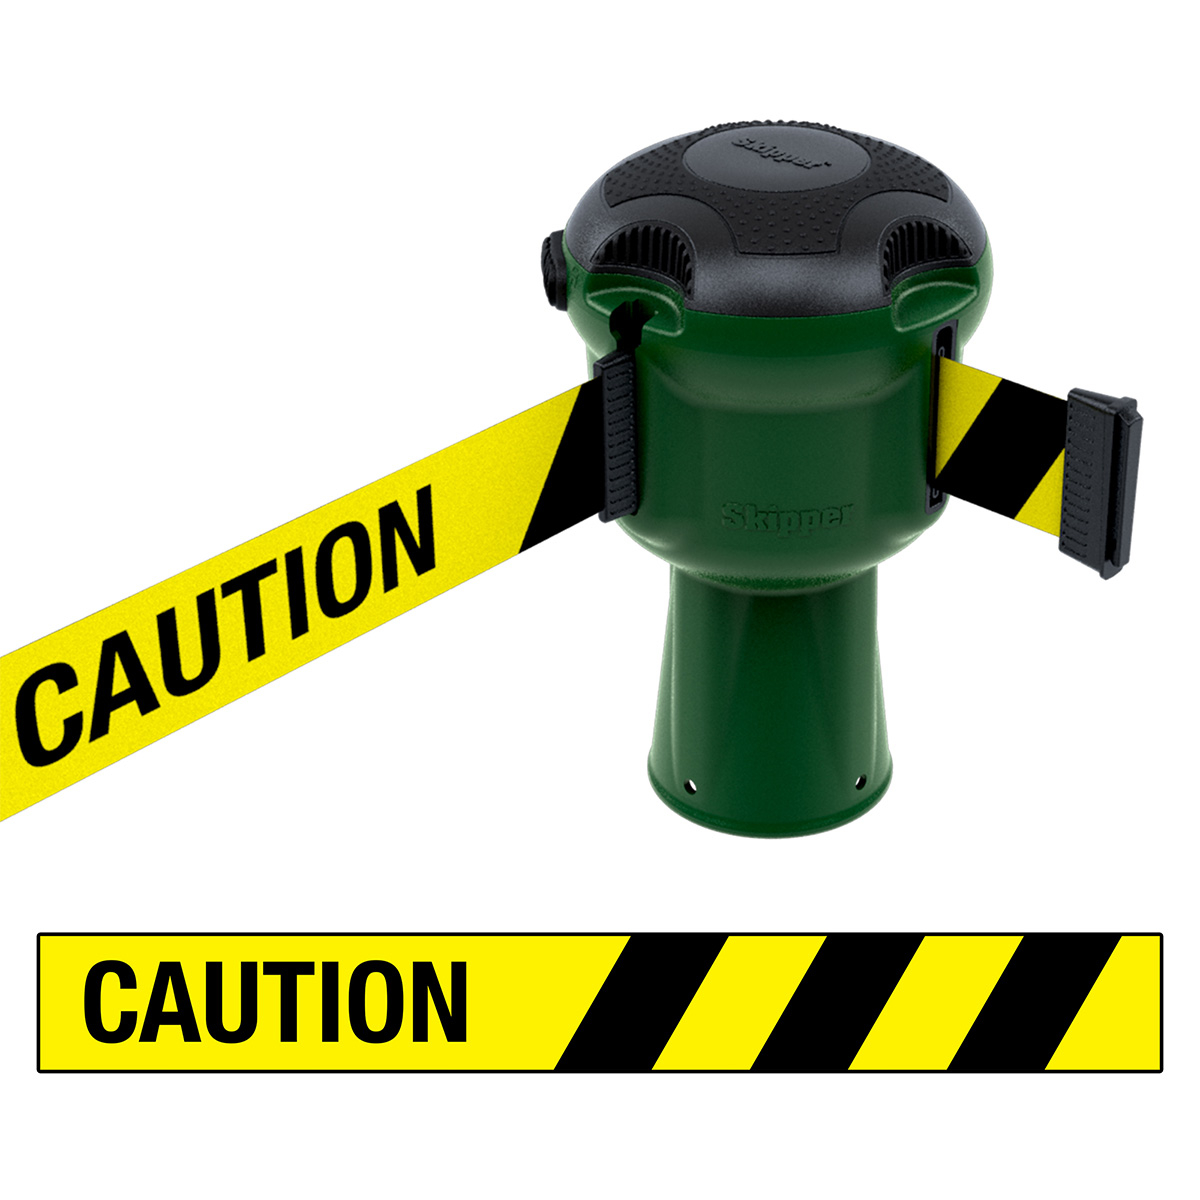 Skipper™ Retractable Safety Barrier in Green With Printed Caution Massage on Webbing Tape